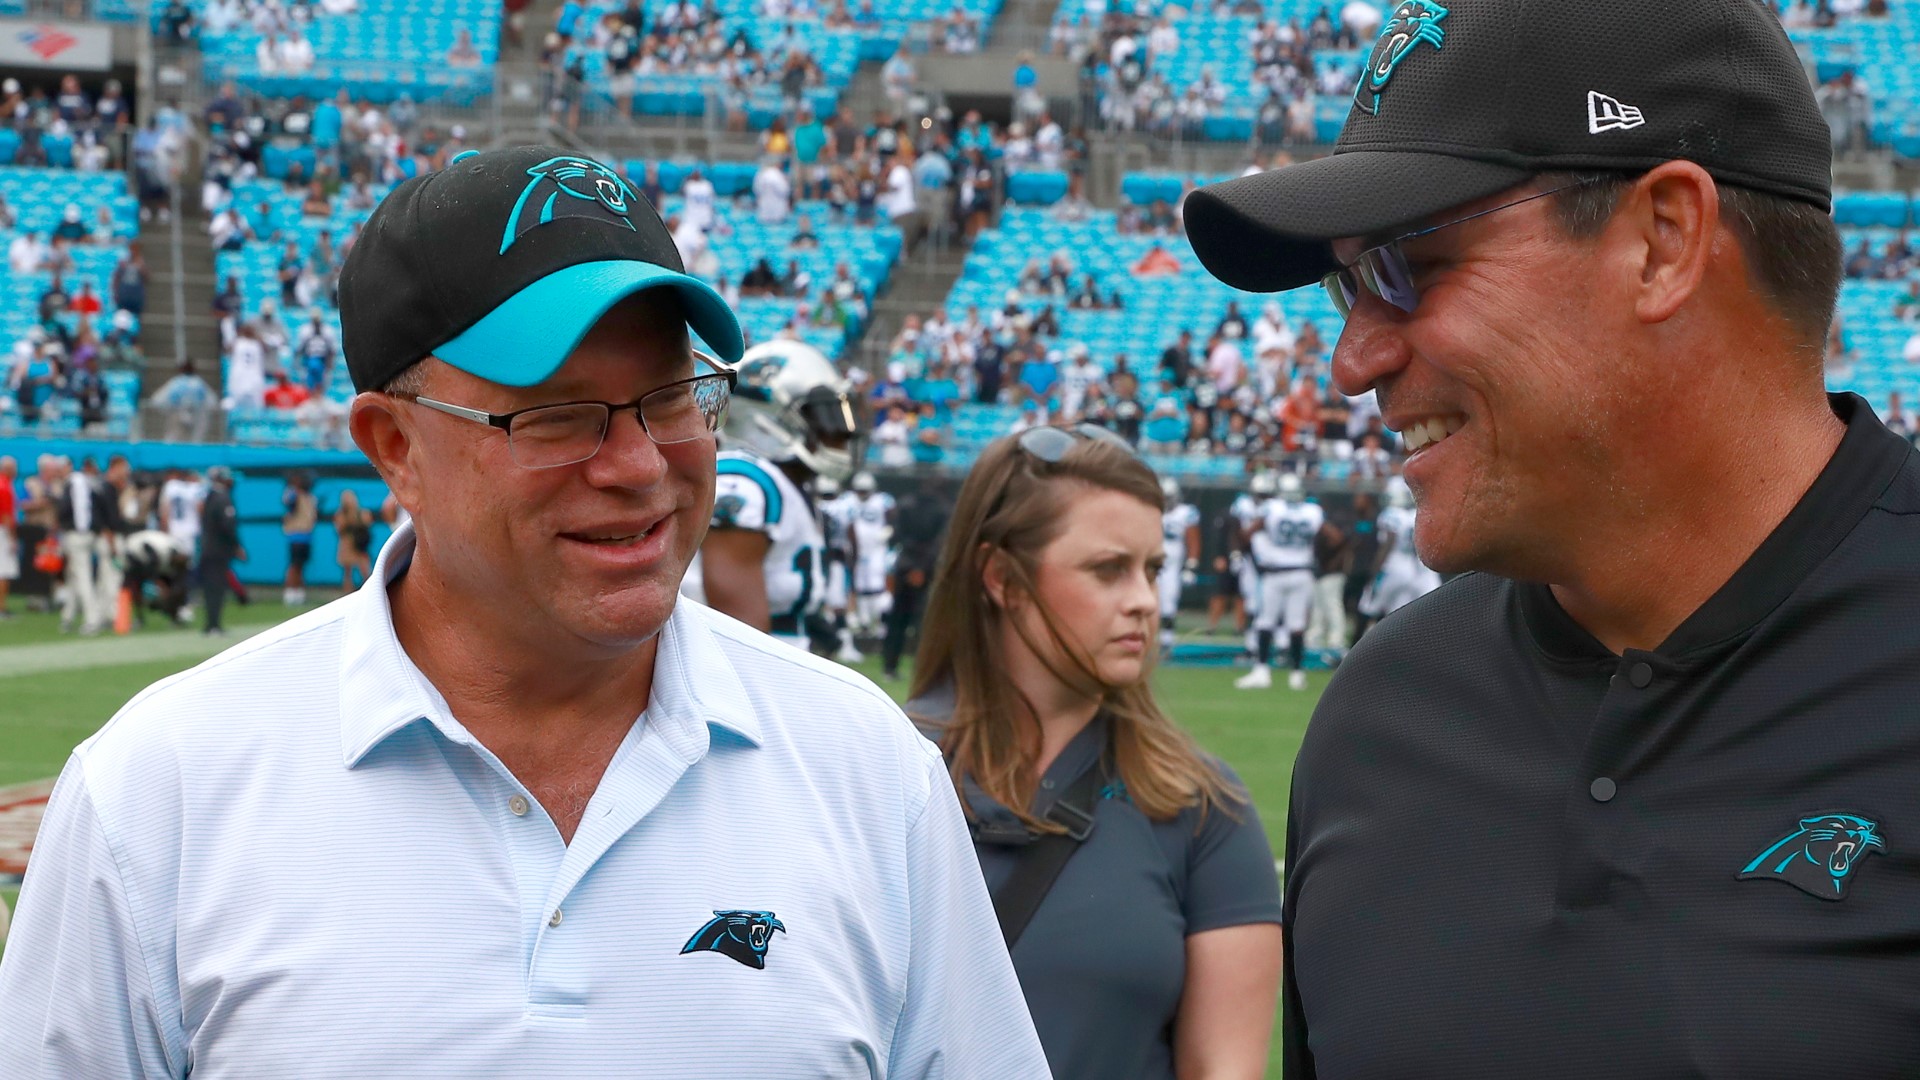 Panthers owner David Tepper said it was "just time" to move on from head coach Ron Rivera after two subpar seasons in a row.